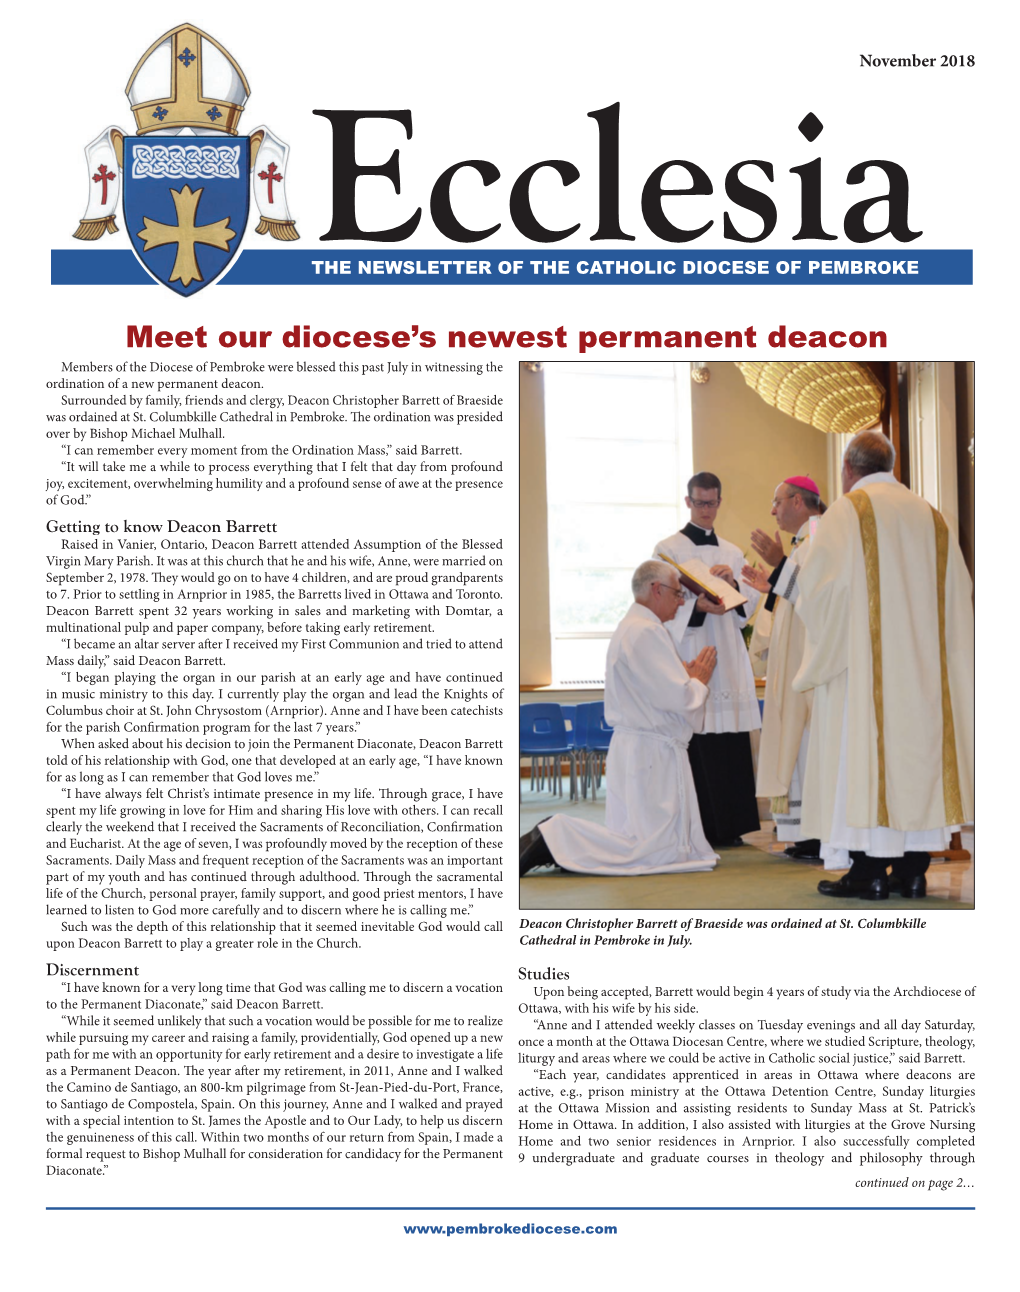 Meet Our Diocese's Newest Permanent Deacon